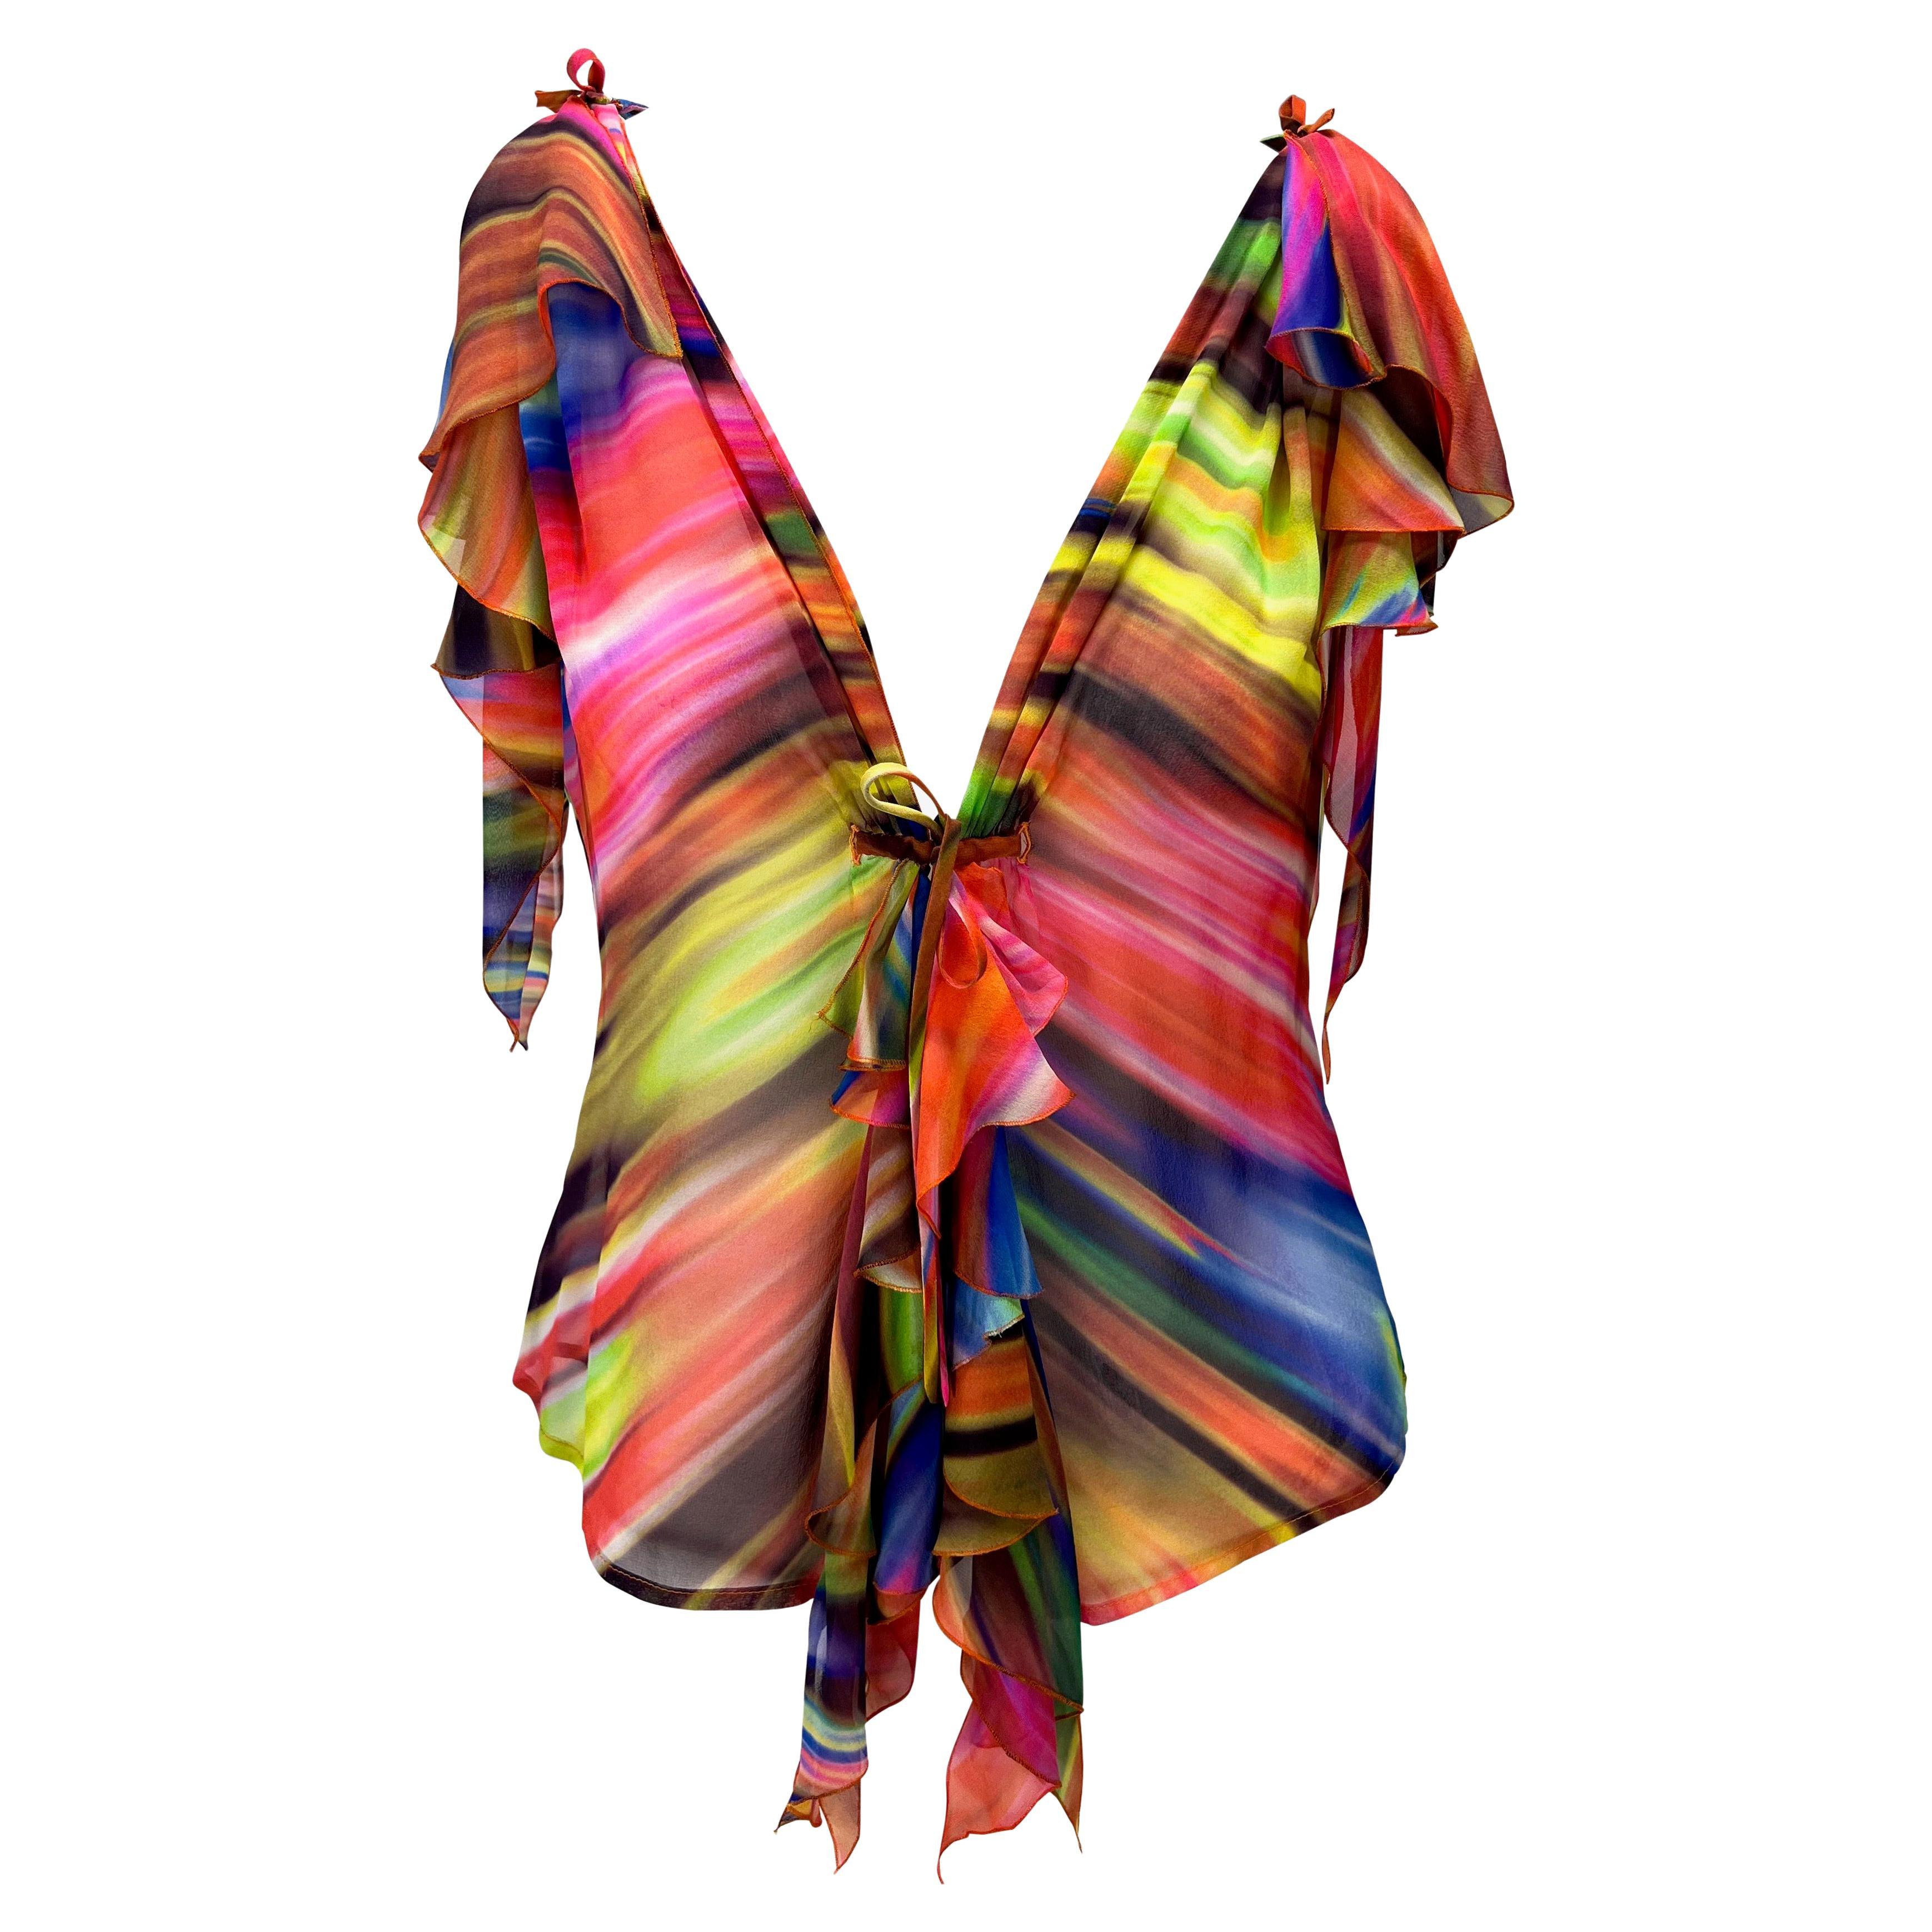 Presenting a stunning multicolor Gianni Versace Couture top, designed by Donatella Versace. From the Fall/Winter 2002 collection, this fabulous lightweight silk top is covered in an abstract psychedelic pattern and features flowy accents at the